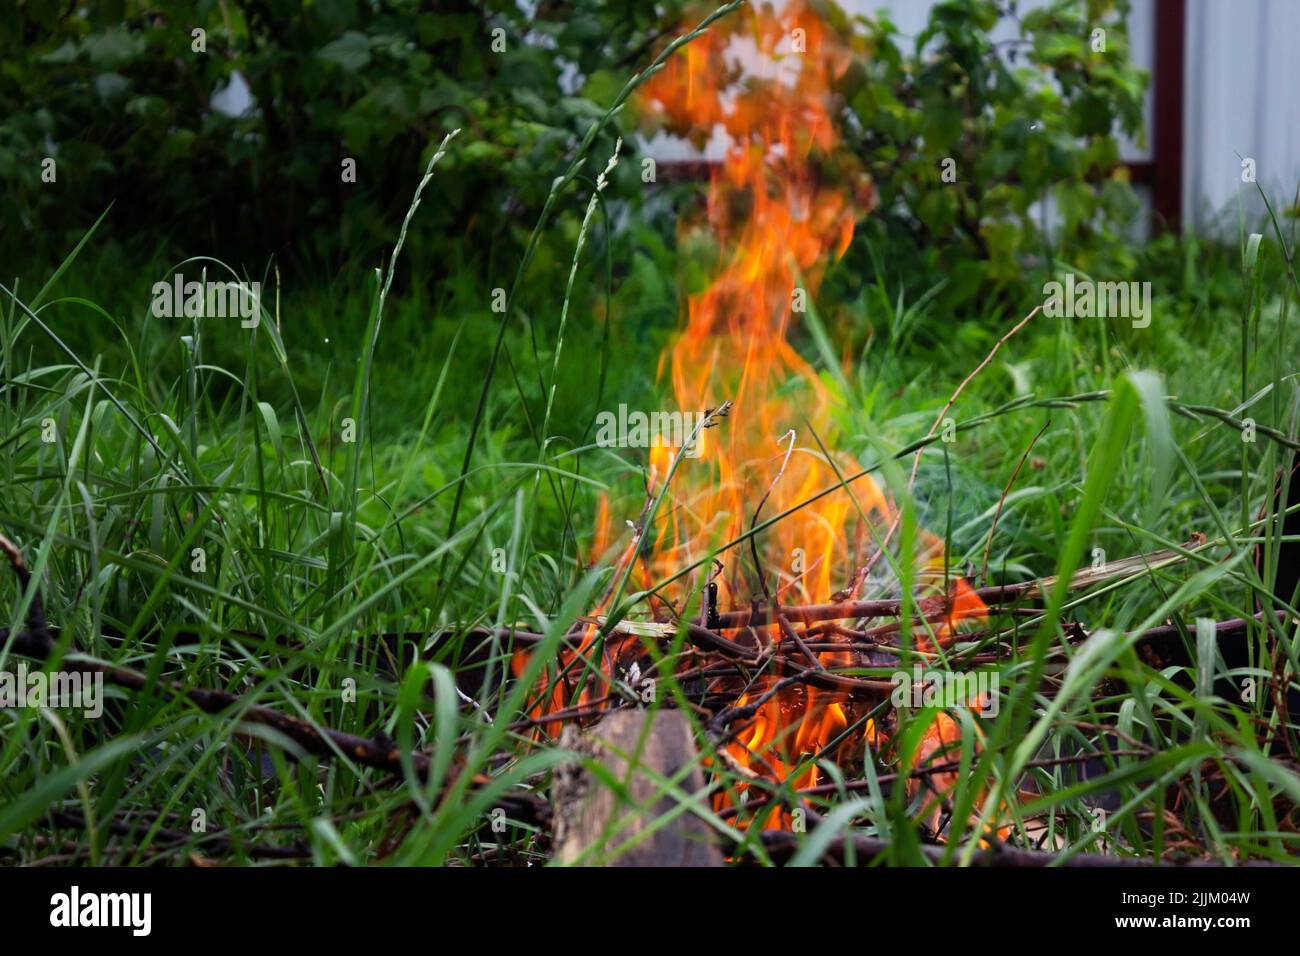 Bonfire on a background of green grass Stock Photo